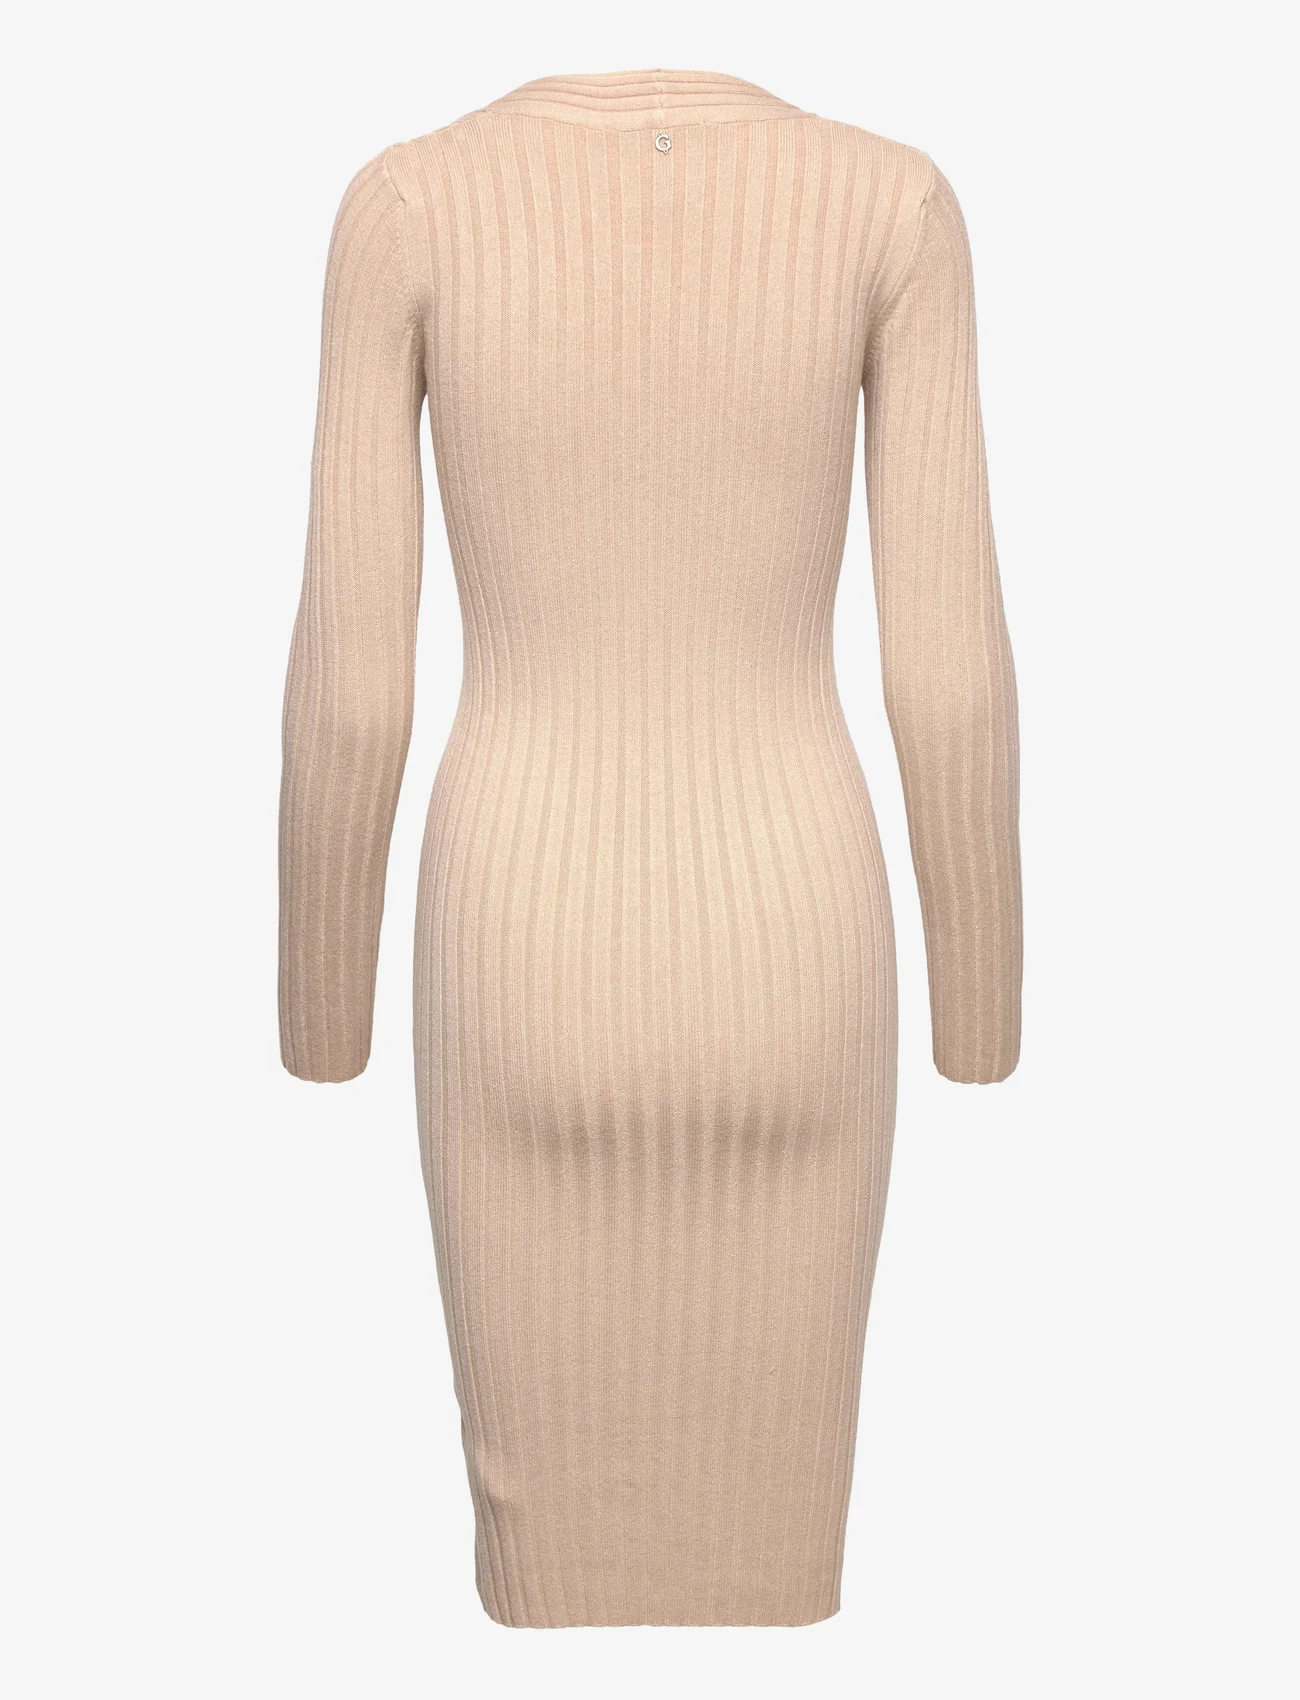 GUESS Jeans - GABRIELLE DRESS SWEATER - bodycon dresses - smoked peach - 1